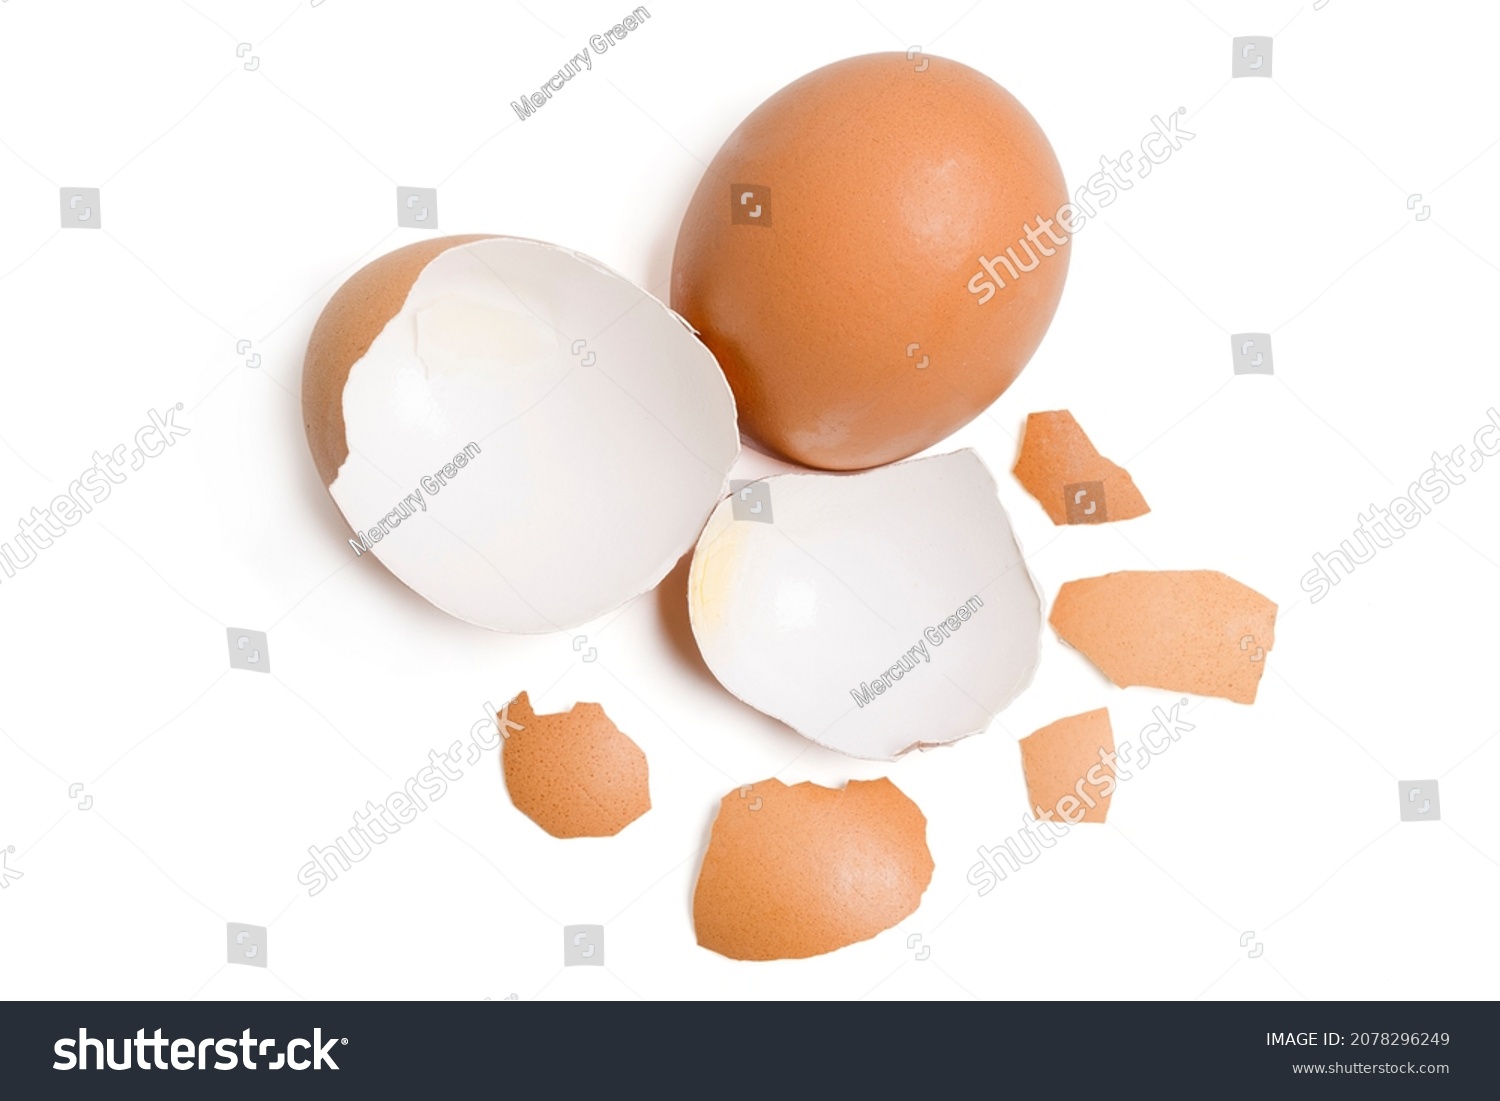 Isolated Broken eggshell. Top view group of broken eggshells stacked on white background. Flat lay. #2078296249